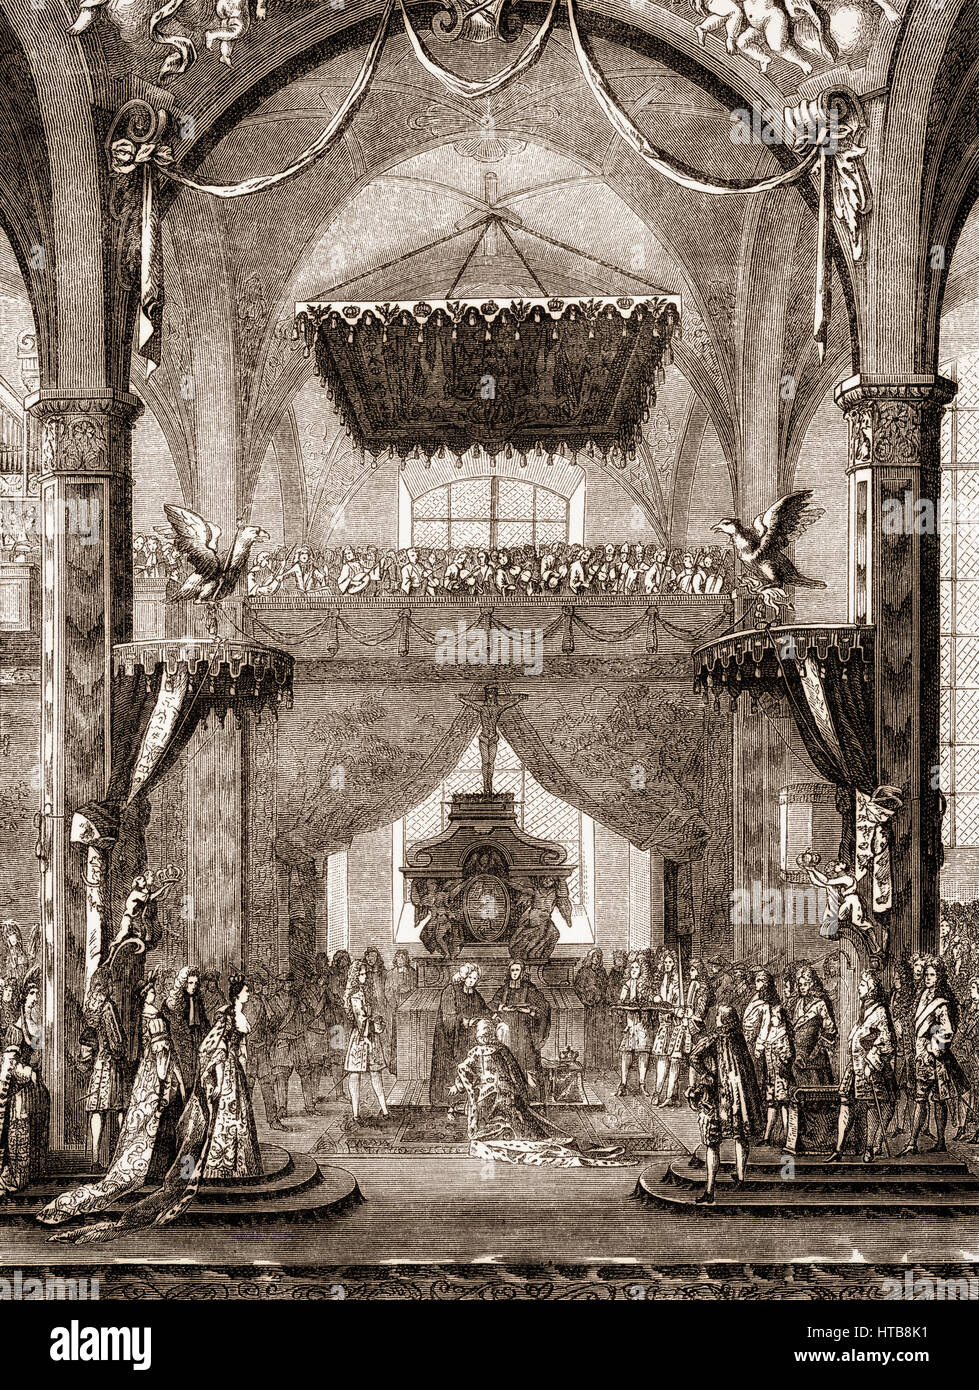 The Coronation of Frederick I, 1657 - 1713, the first King in Prussia, as Frederick III Elector of Brandenburg, 18 January 1701, Königsberg Stock Photo